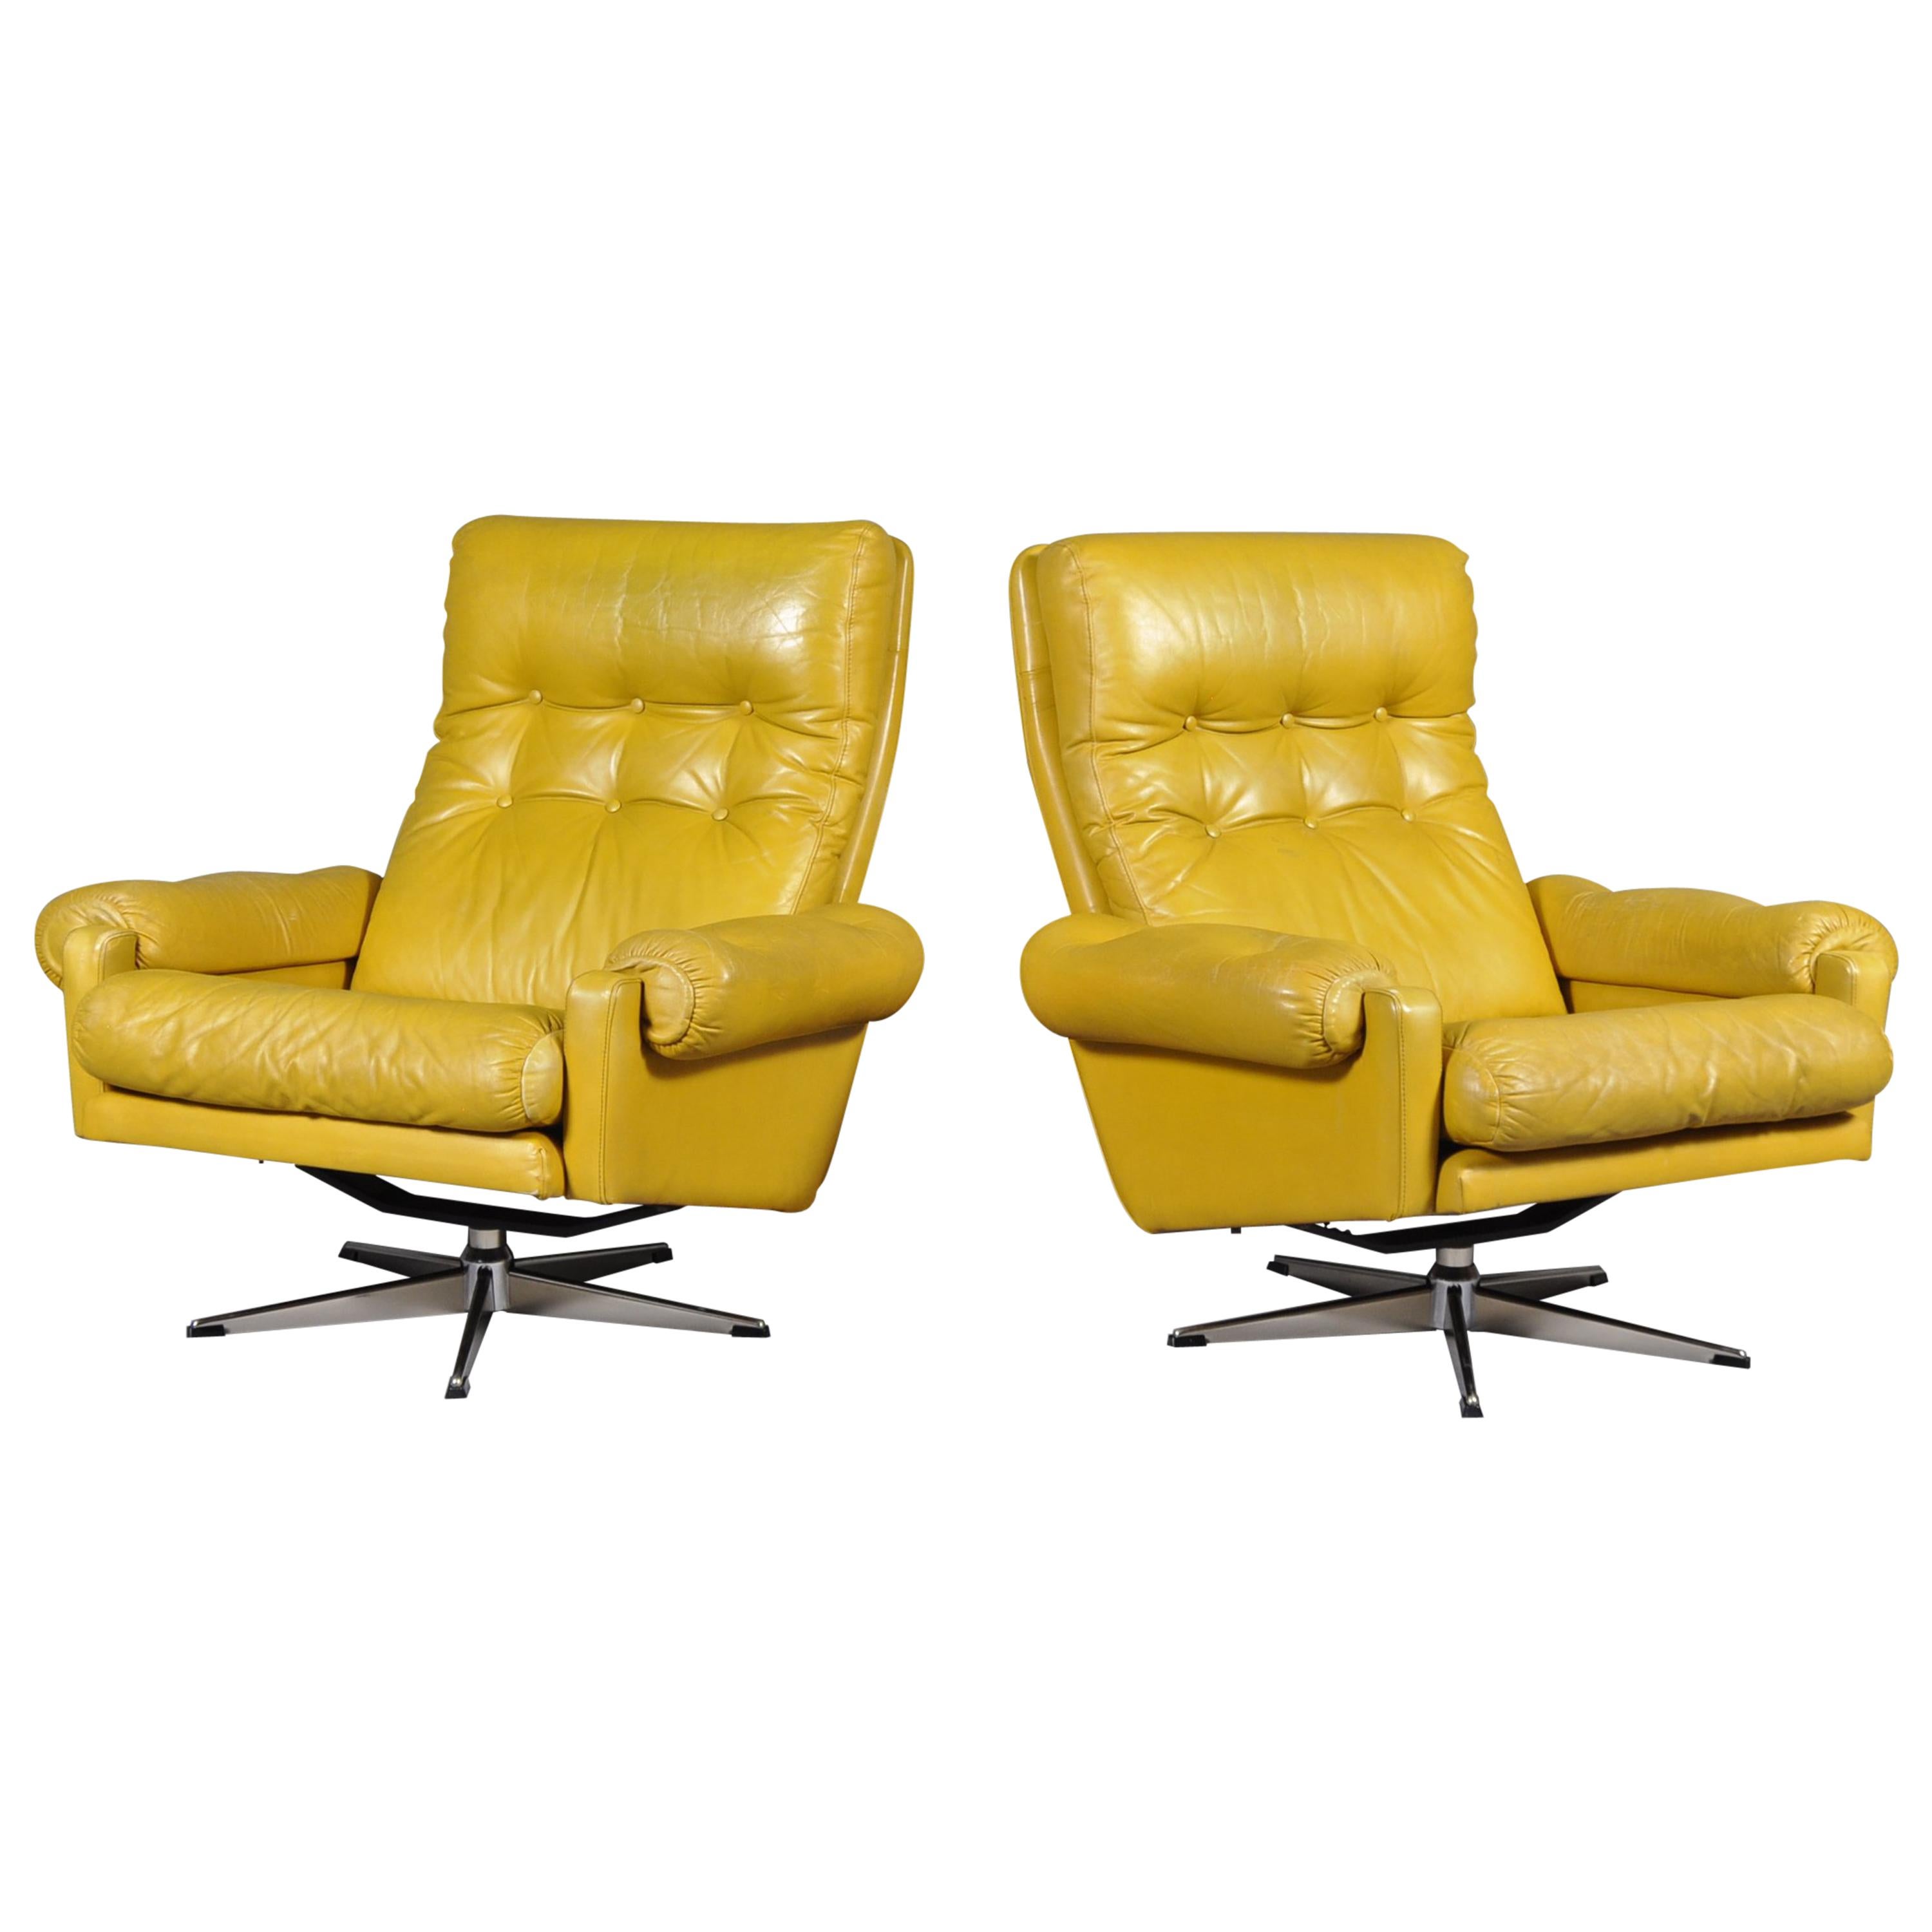 Set of Two Swedish Swivel Chairs from Lystolet, Sweden, 1975